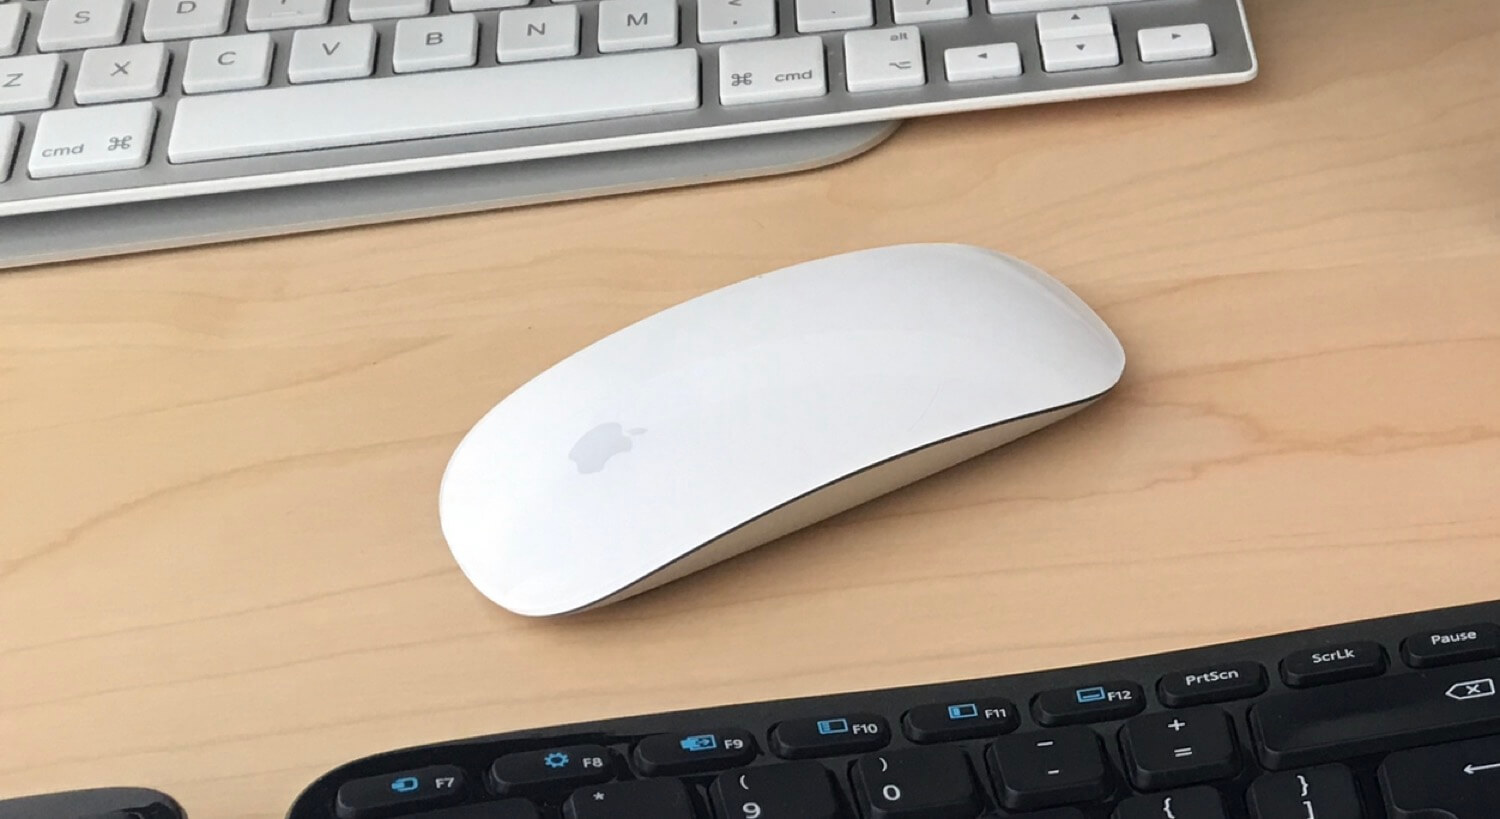 Removing features, noise and buttons to make your product perfect - like Apple Mighty Mouse